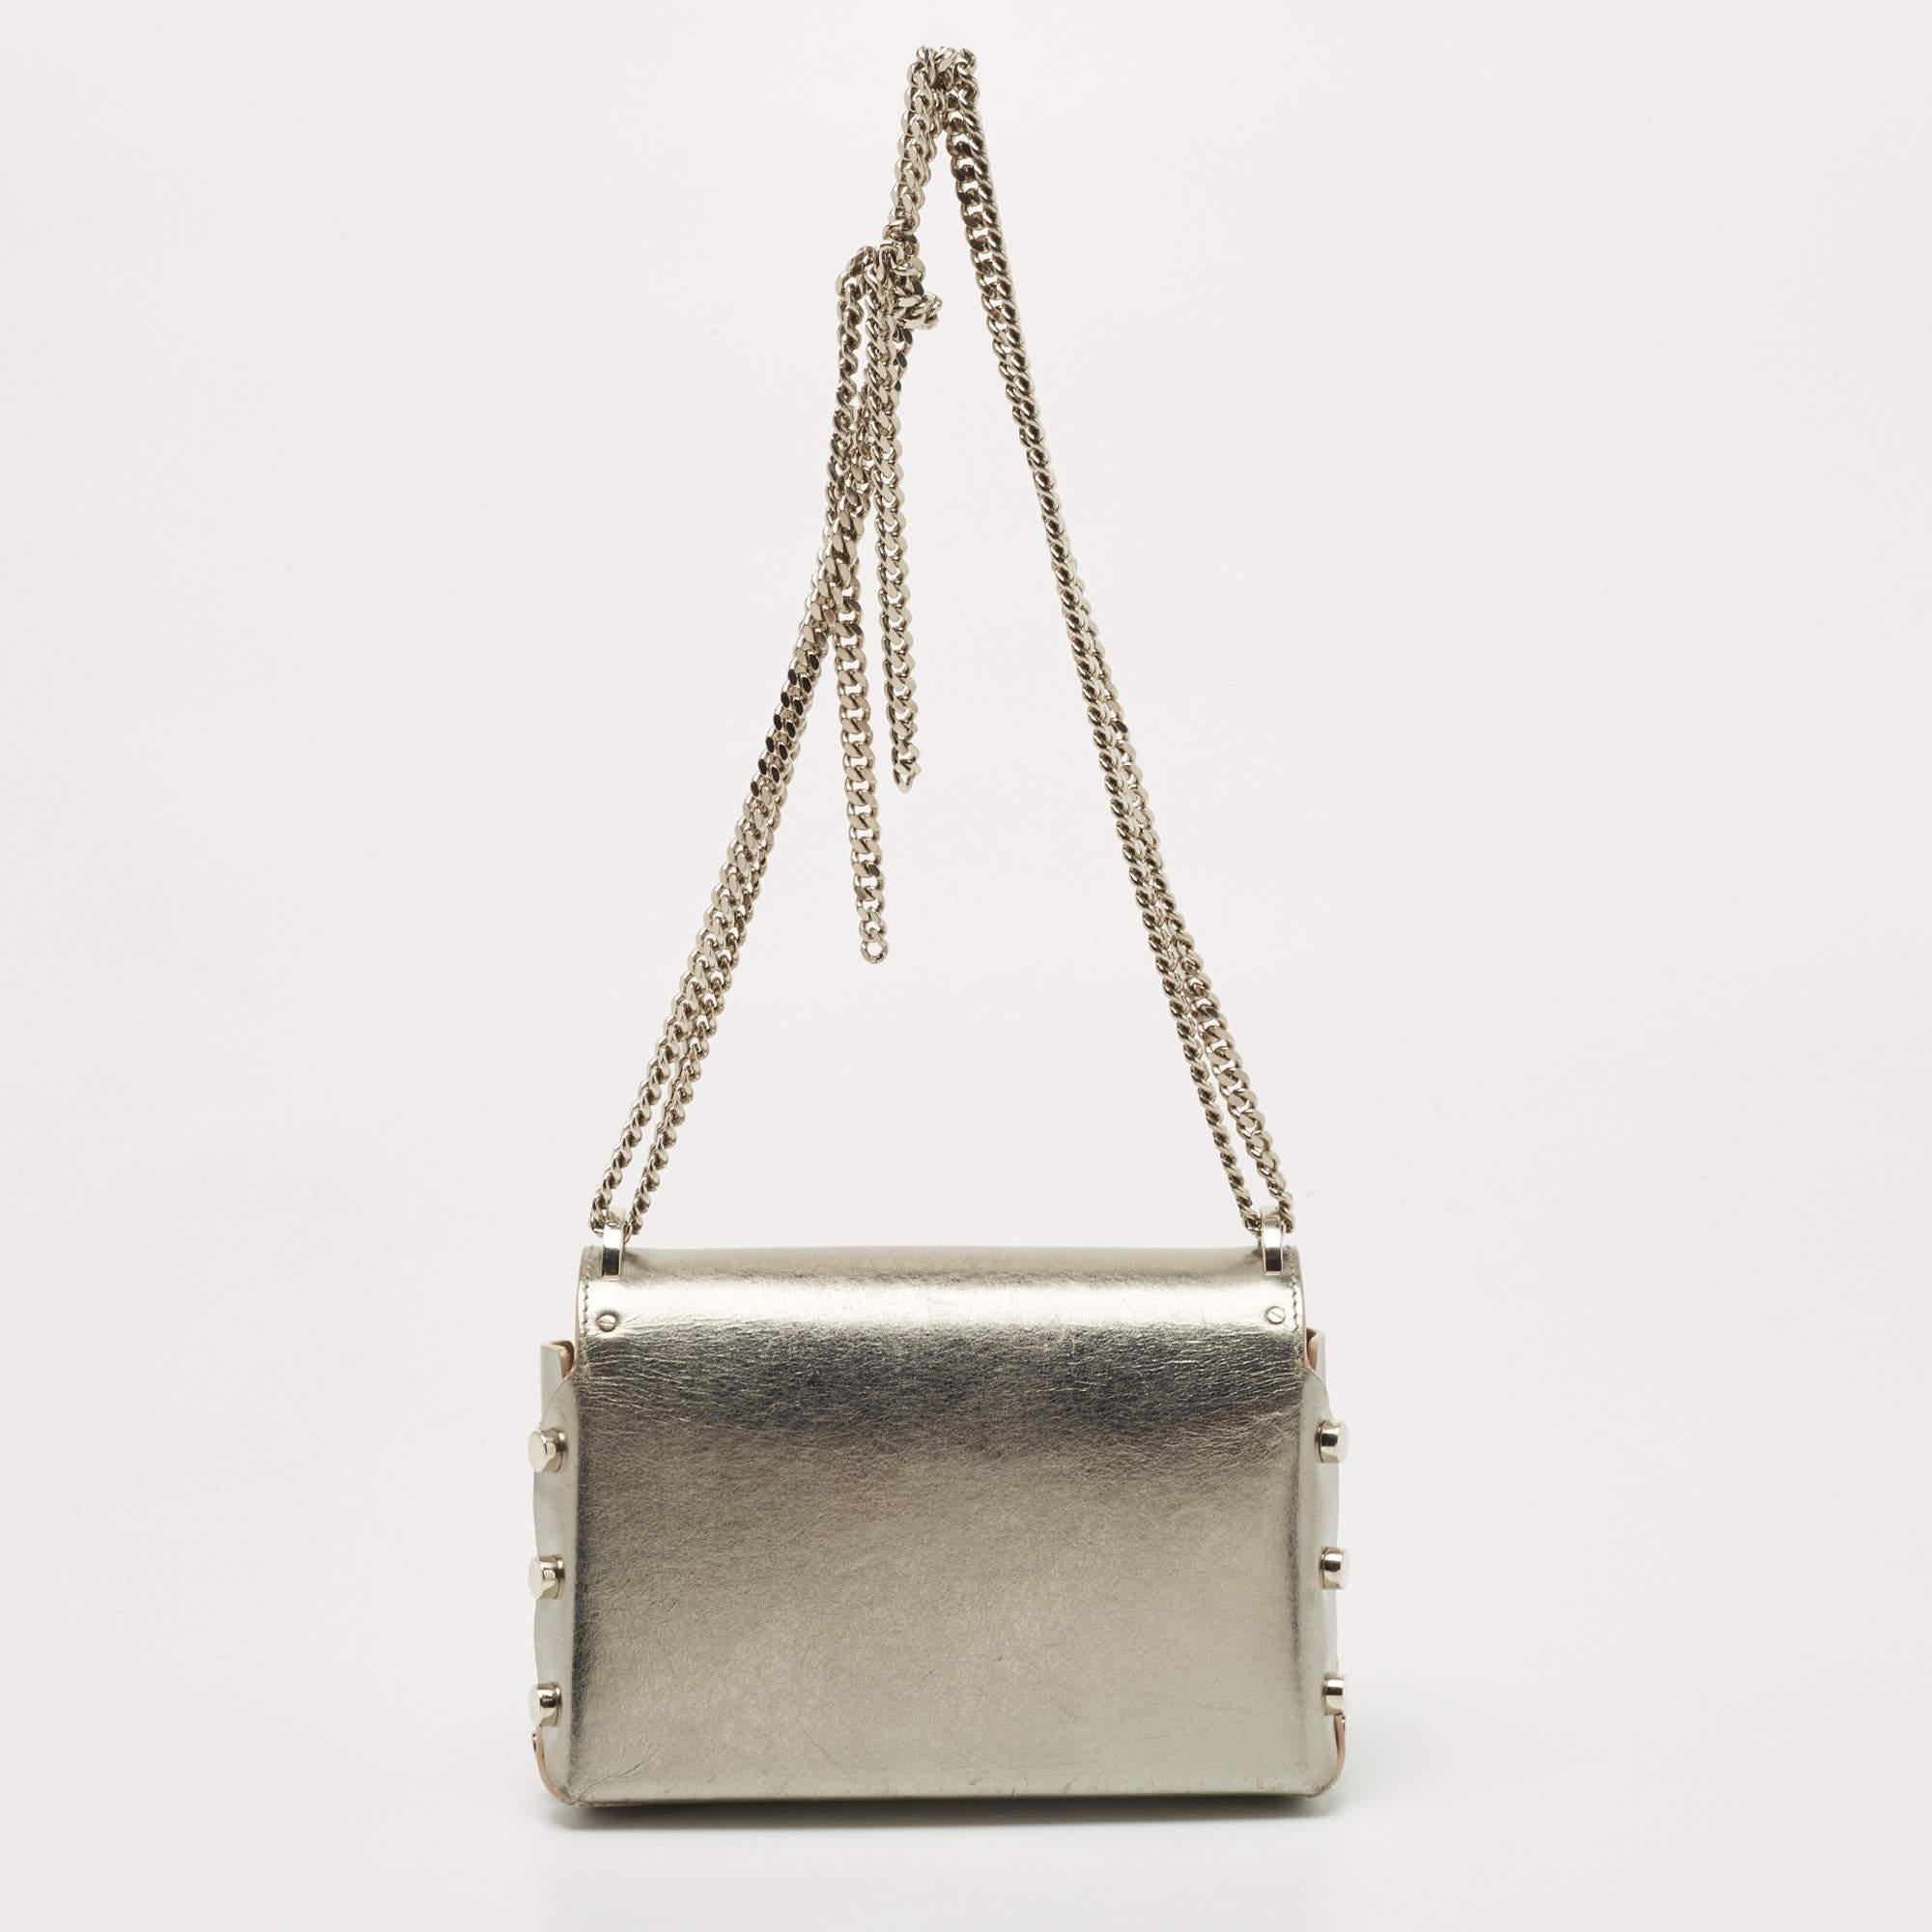 One of the signature details of this bag by Jimmy Choo is the push-lock that has a pointed bottom. This shoulder bag flaunts a super-stylish design and secures a suede interior. It has a gorgeous silver leather exterior and is a statement creation